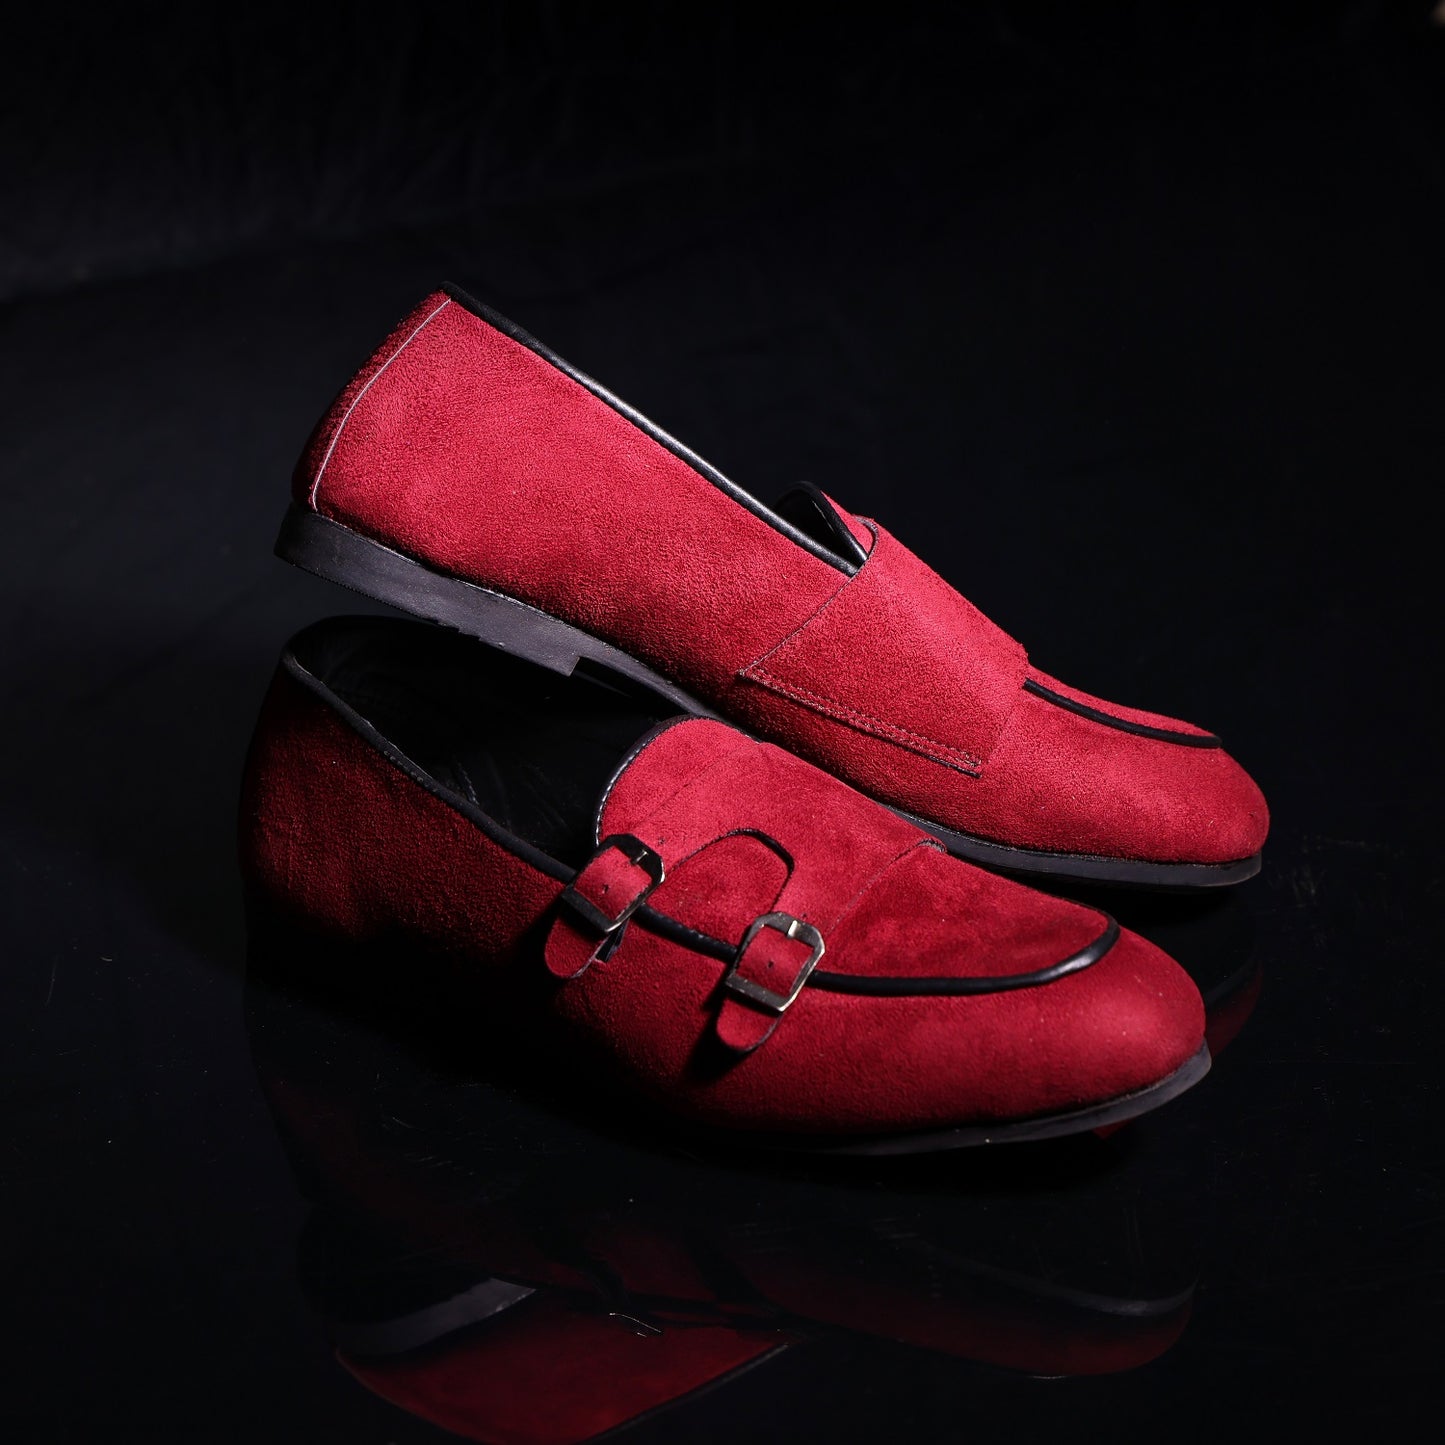 The Aurous Urbane Slip On Loafers